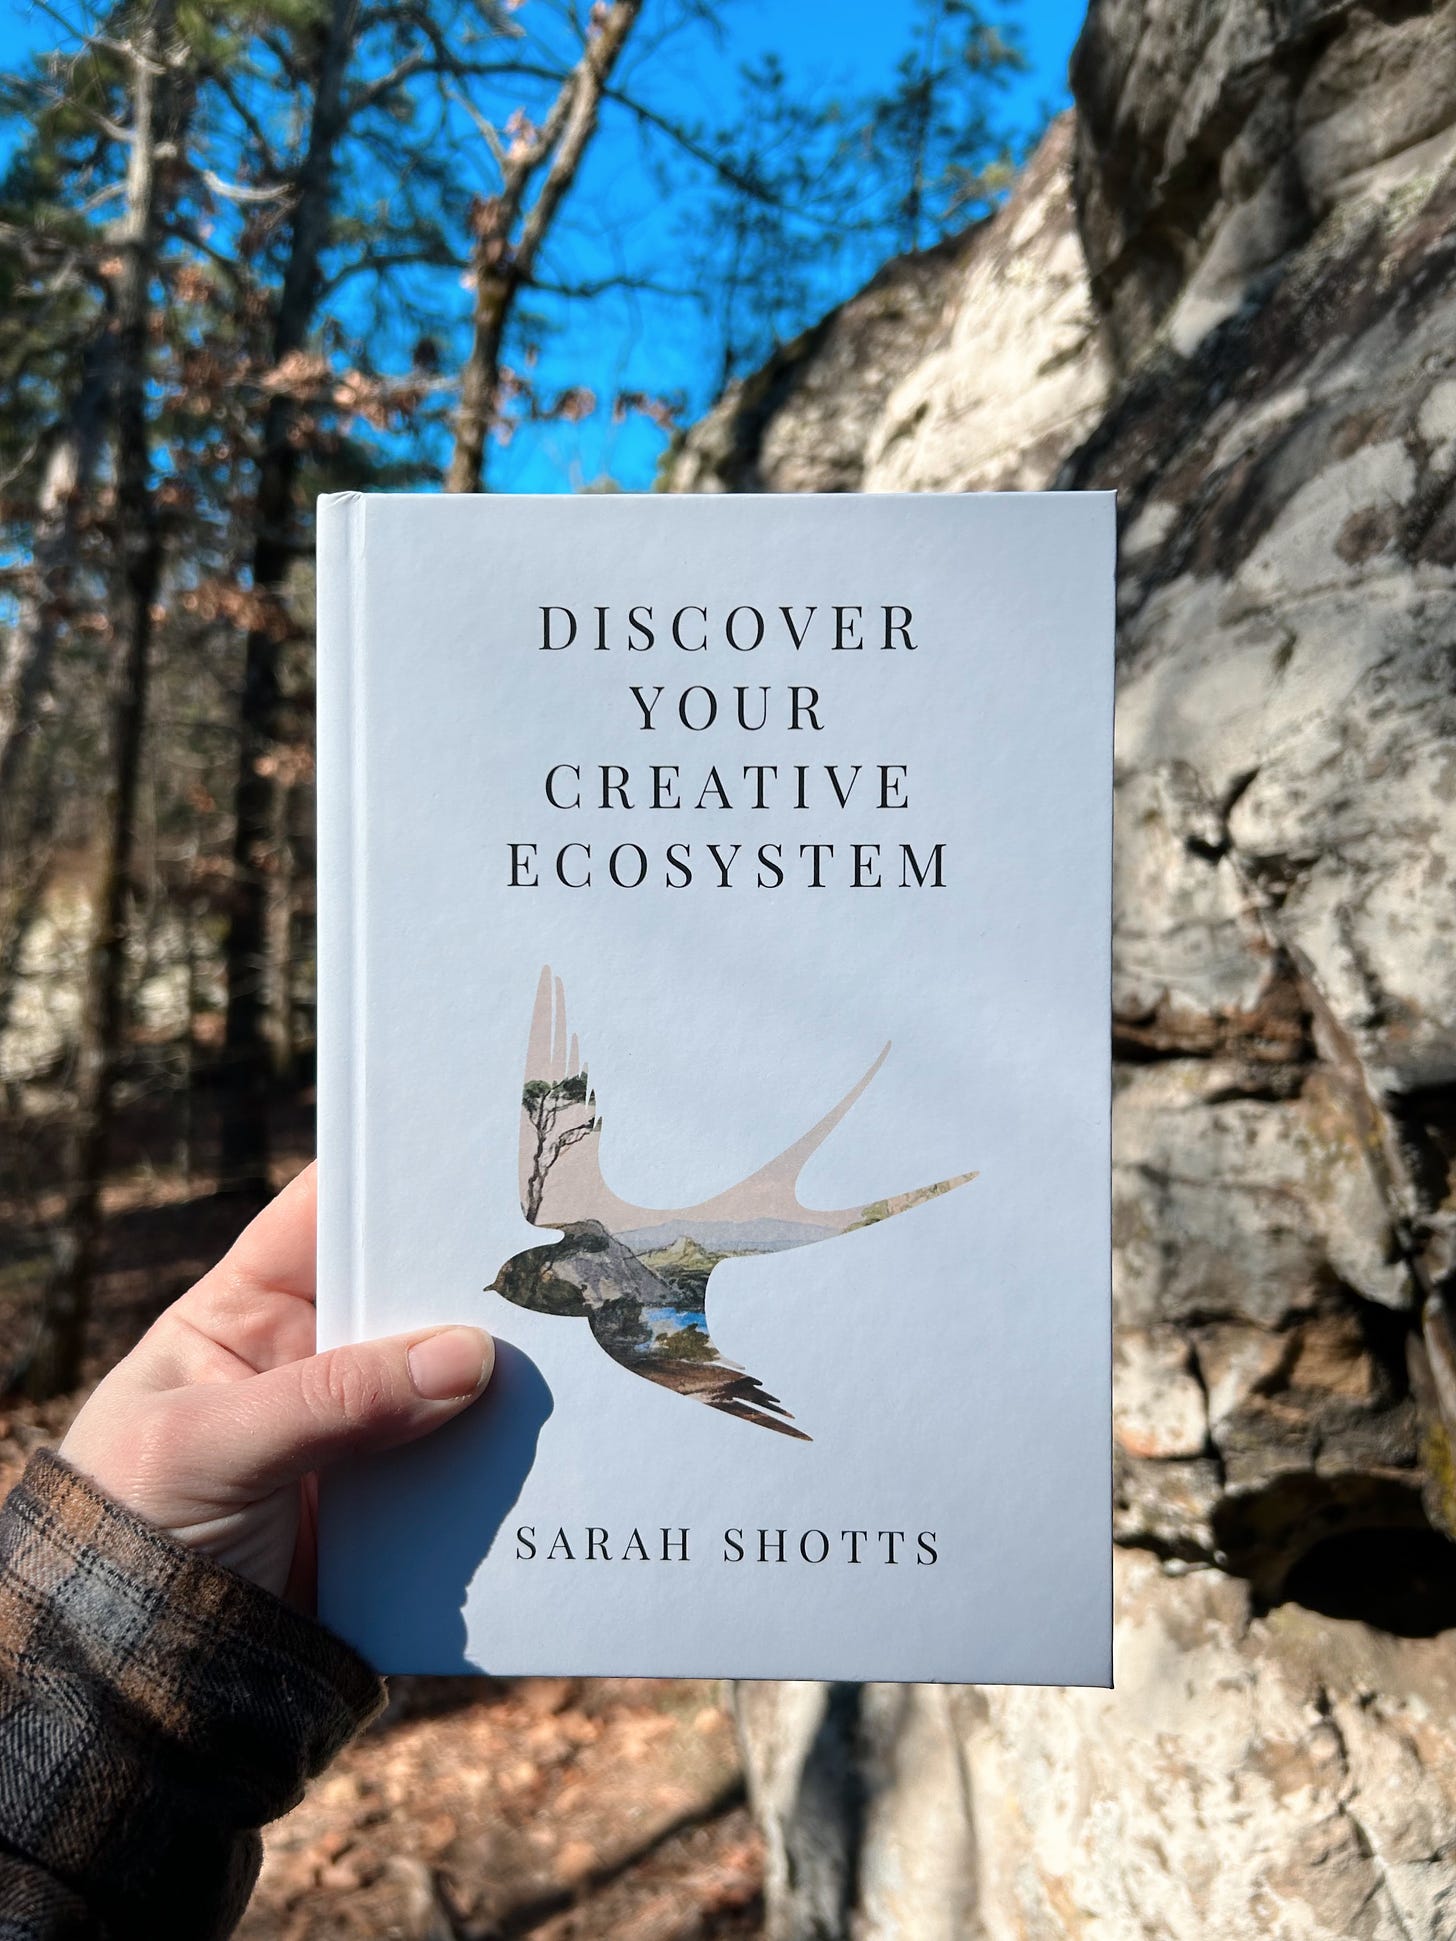 Holding my book Discover Your Creative Ecosystem in the Petit Jean Mountains near tall rocks and pines. The cover has a bird silhouette that is cut out to reveal a watercolor landscape of mountains and trees.